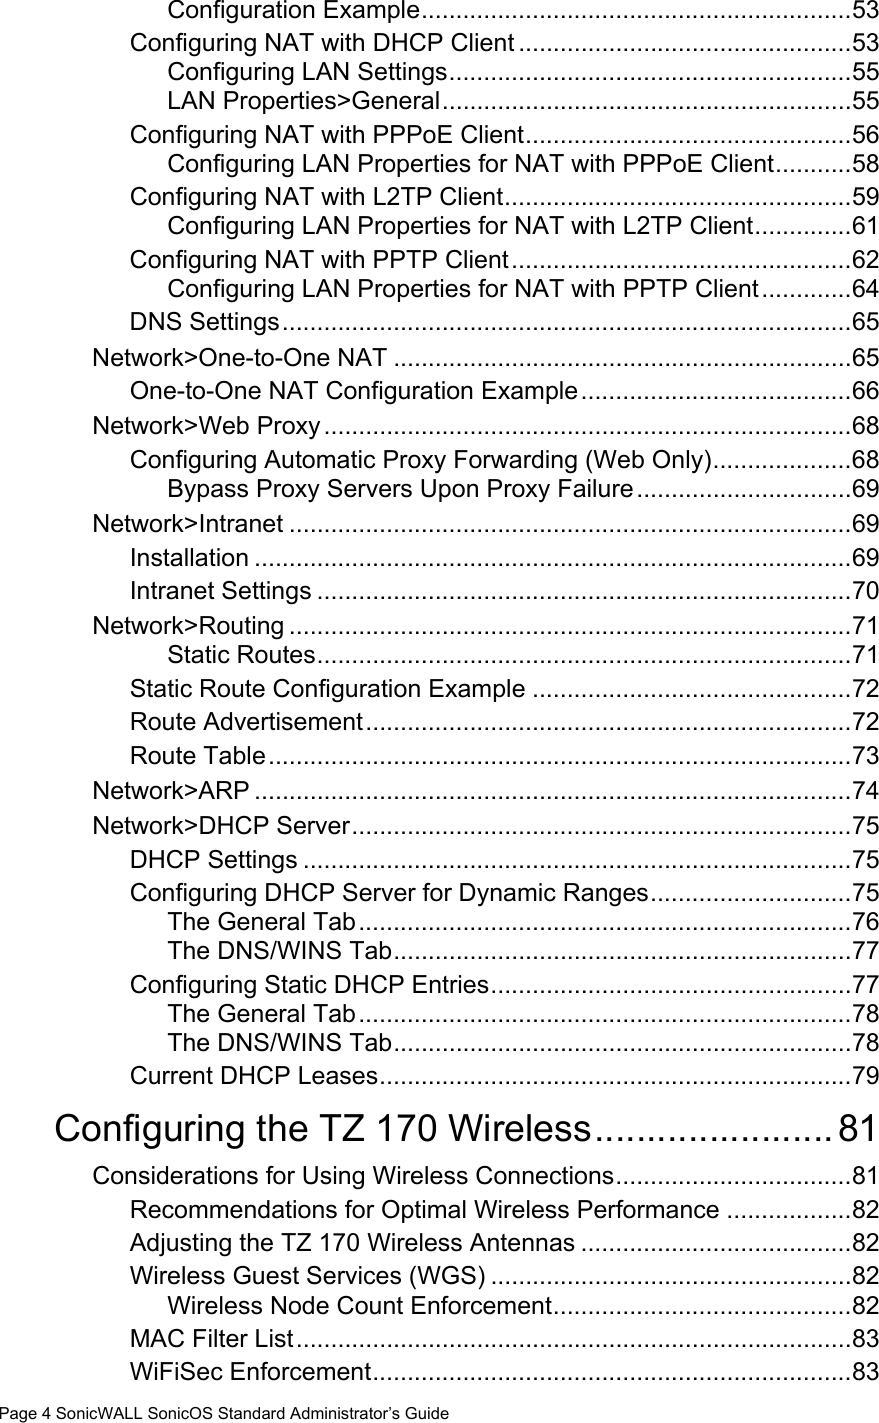 Page 4 SonicWALL SonicOS Standard Administrator’s GuideConfiguration Example..............................................................53Configuring NAT with DHCP Client ................................................53Configuring LAN Settings..........................................................55LAN Properties&gt;General...........................................................55Configuring NAT with PPPoE Client...............................................56Configuring LAN Properties for NAT with PPPoE Client...........58Configuring NAT with L2TP Client..................................................59Configuring LAN Properties for NAT with L2TP Client..............61Configuring NAT with PPTP Client.................................................62Configuring LAN Properties for NAT with PPTP Client.............64DNS Settings..................................................................................65Network&gt;One-to-One NAT ..................................................................65One-to-One NAT Configuration Example.......................................66Network&gt;Web Proxy............................................................................68Configuring Automatic Proxy Forwarding (Web Only)....................68Bypass Proxy Servers Upon Proxy Failure...............................69Network&gt;Intranet .................................................................................69Installation ......................................................................................69Intranet Settings .............................................................................70Network&gt;Routing .................................................................................71Static Routes.............................................................................71Static Route Configuration Example ..............................................72Route Advertisement......................................................................72Route Table....................................................................................73Network&gt;ARP ......................................................................................74Network&gt;DHCP Server........................................................................75DHCP Settings ...............................................................................75Configuring DHCP Server for Dynamic Ranges.............................75The General Tab.......................................................................76The DNS/WINS Tab..................................................................77Configuring Static DHCP Entries....................................................77The General Tab.......................................................................78The DNS/WINS Tab..................................................................78Current DHCP Leases....................................................................79Configuring the TZ 170 Wireless.......................81Considerations for Using Wireless Connections..................................81Recommendations for Optimal Wireless Performance ..................82Adjusting the TZ 170 Wireless Antennas .......................................82Wireless Guest Services (WGS) ....................................................82Wireless Node Count Enforcement...........................................82MAC Filter List................................................................................83WiFiSec Enforcement.....................................................................83